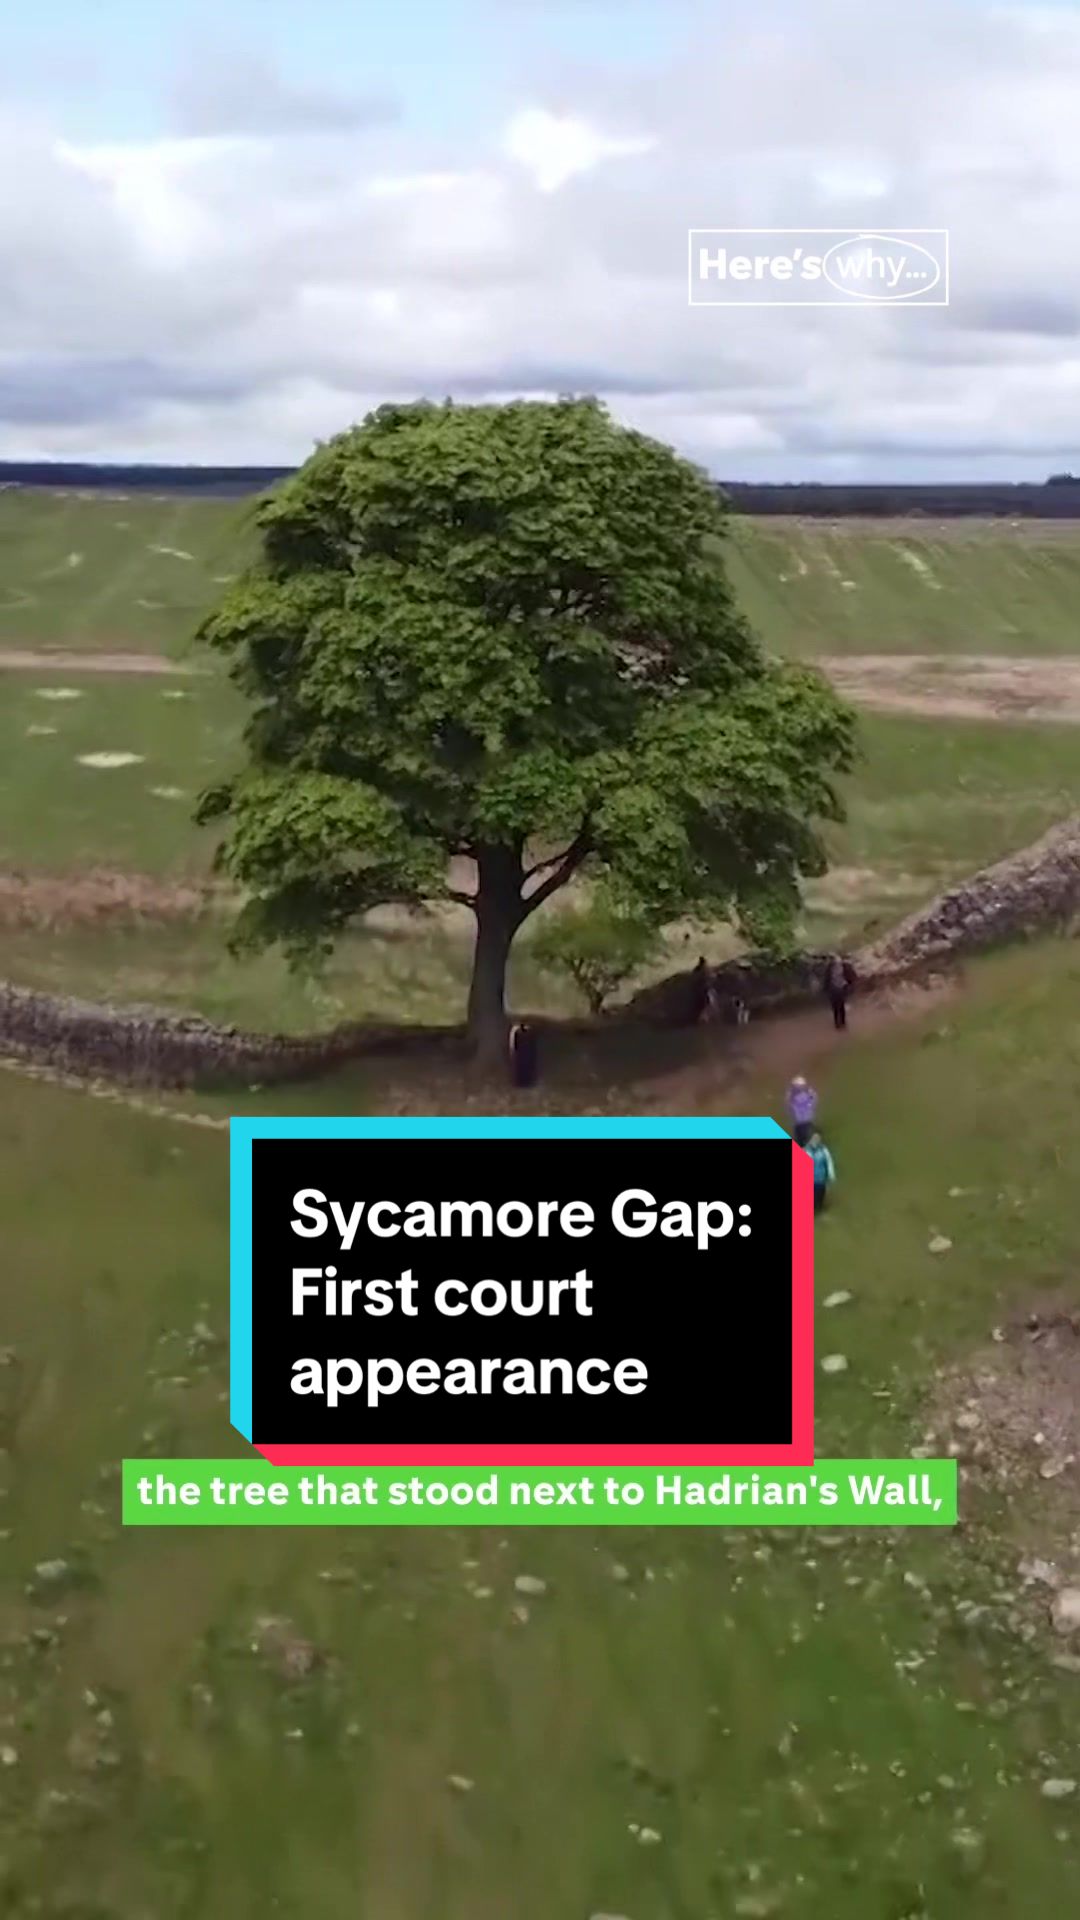 Two men - wearing balaclavas and suits - have appeared in court for the first time, charged with chopping down the famous Sycamore Gap tree #sycamoregap #sycamoregaptree #northumberland #worldheritagesite #hadrianswall